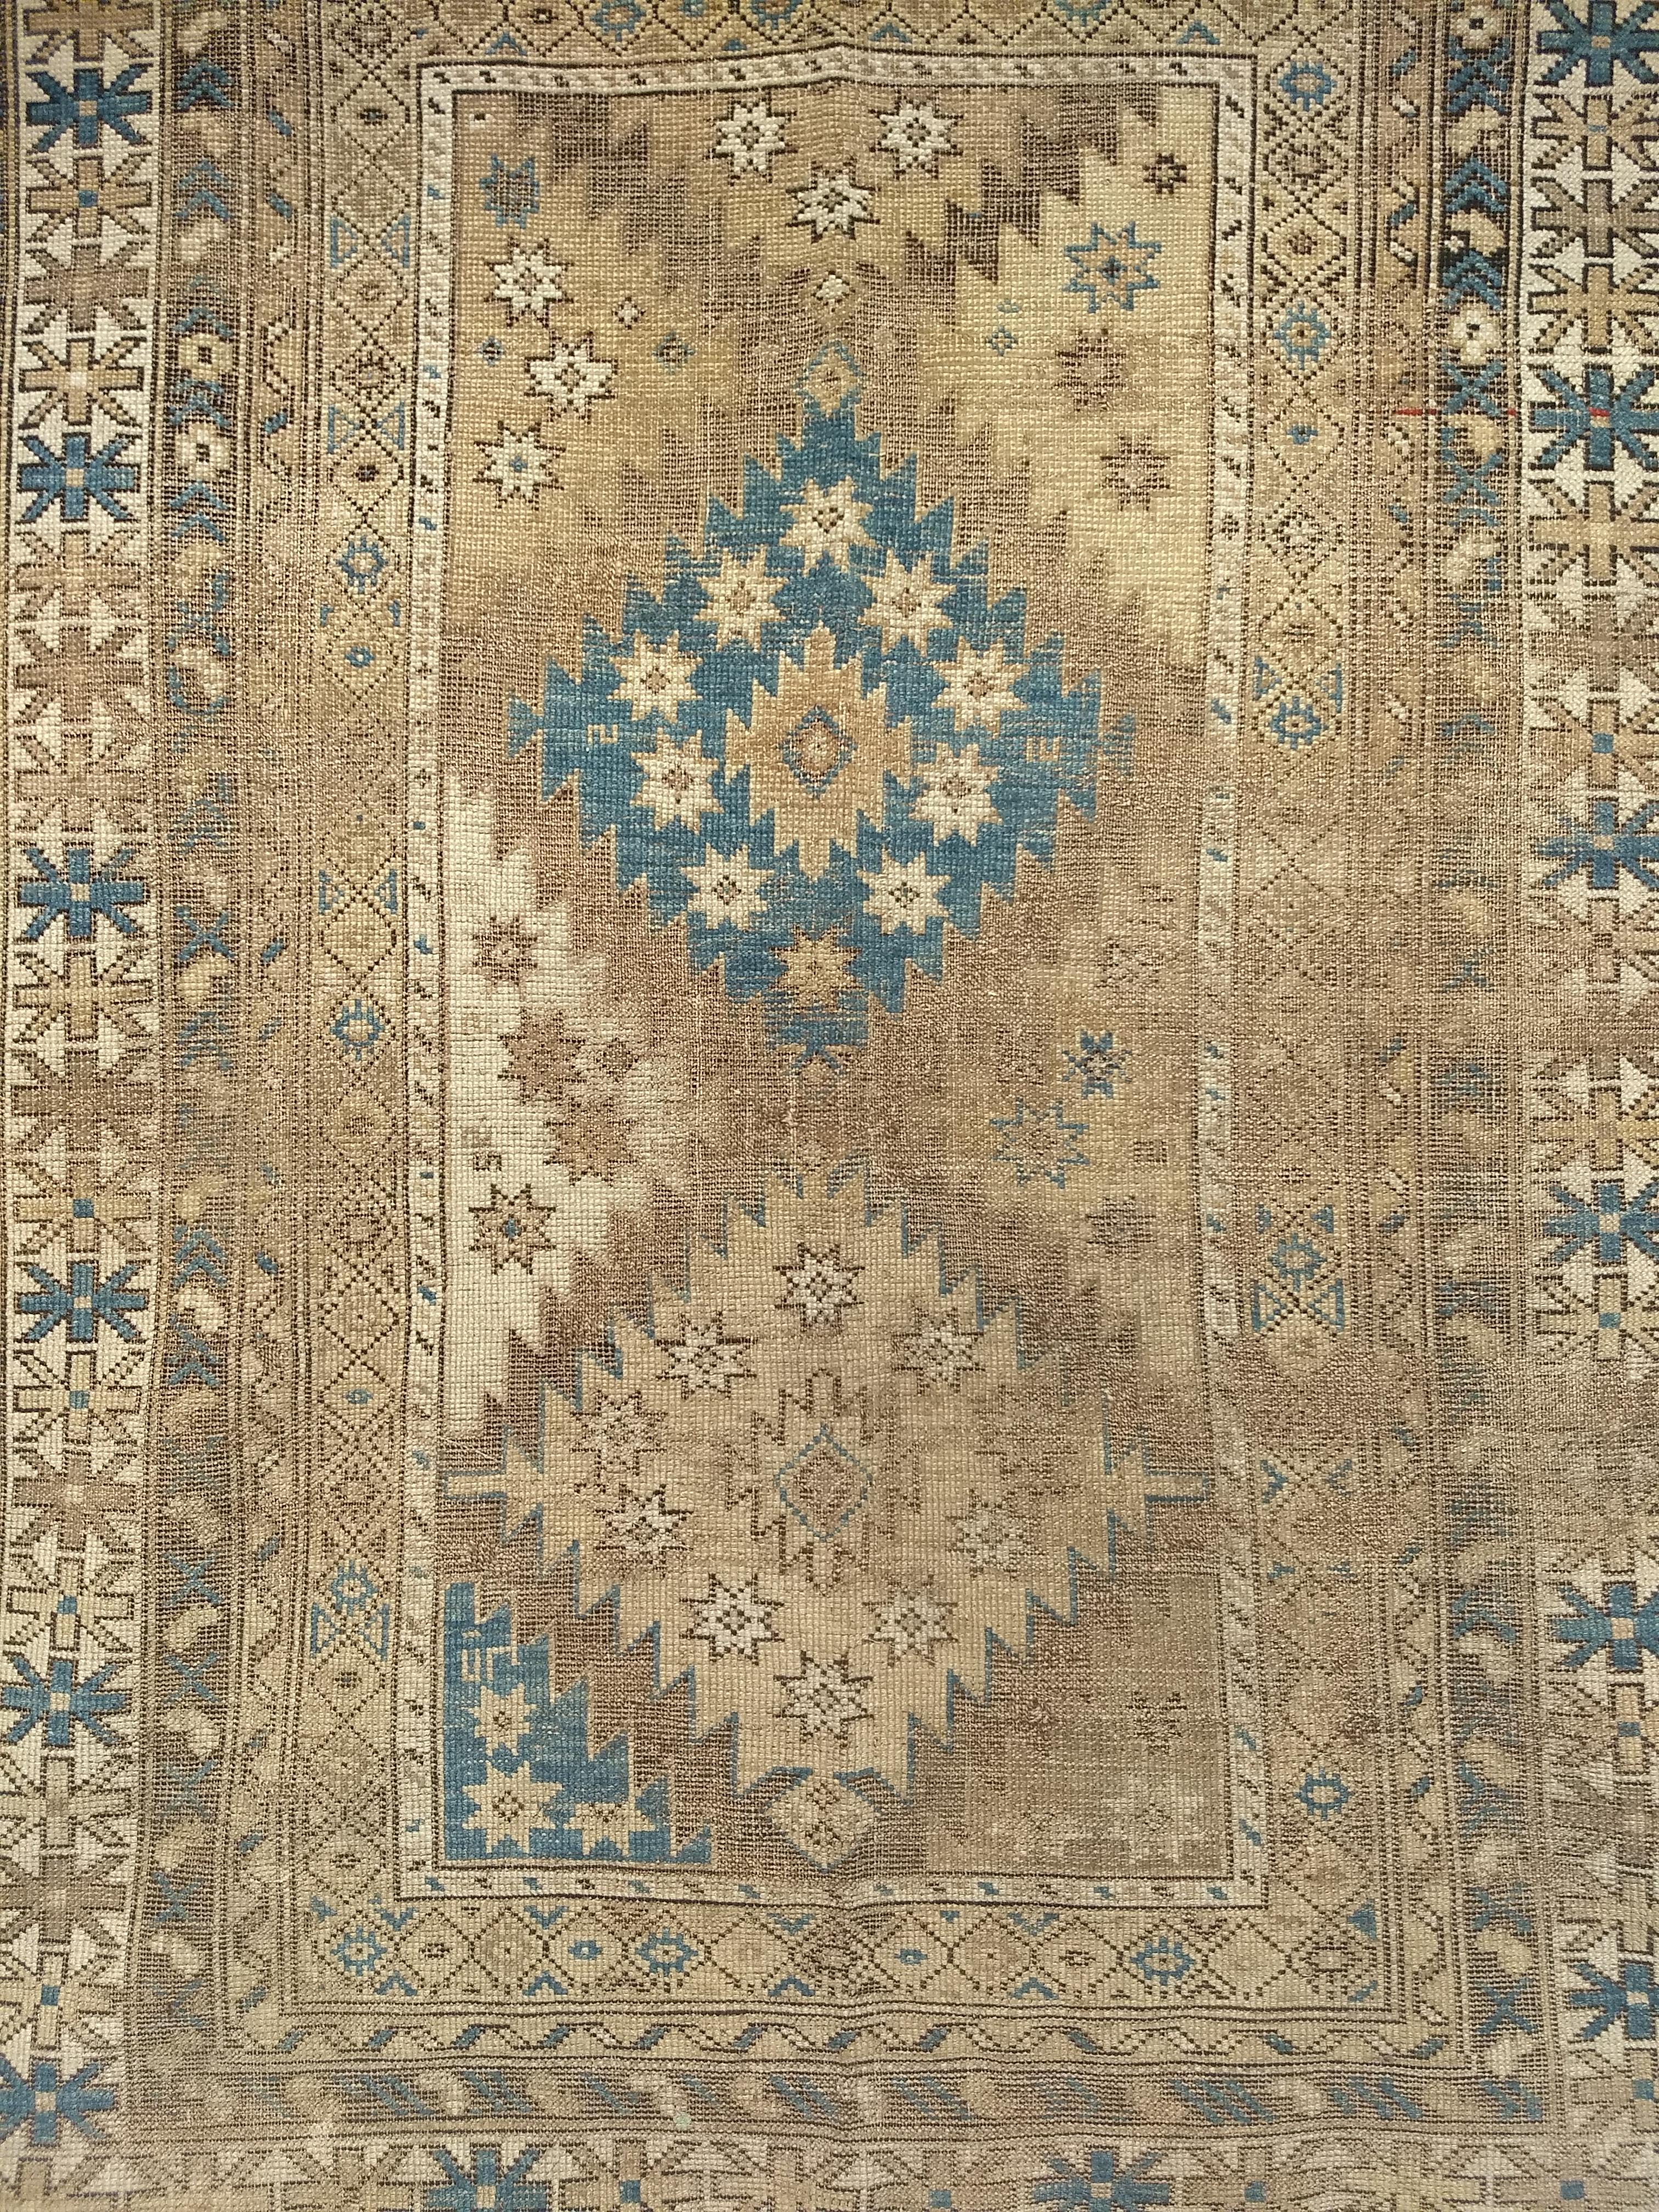 Antique Caucasian Shirvan Area Rug in Pale Blue, Ivory, Camel, Chocolate In Good Condition For Sale In Barrington, IL